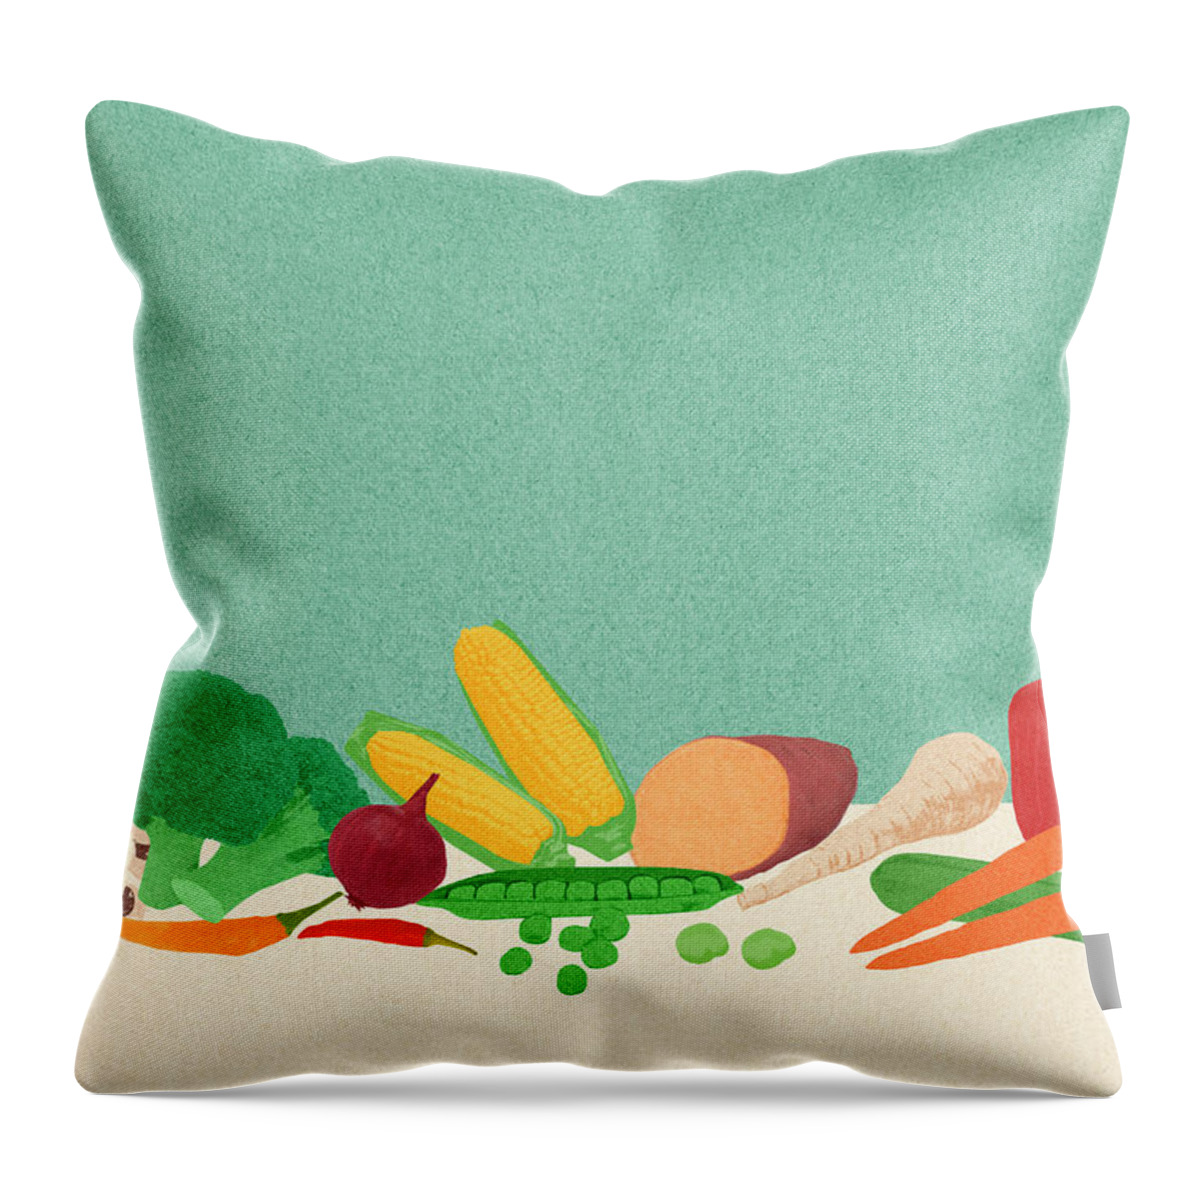 Assorted Throw Pillow featuring the photograph Assortment Of Fresh Vegetables by Ikon Ikon Images